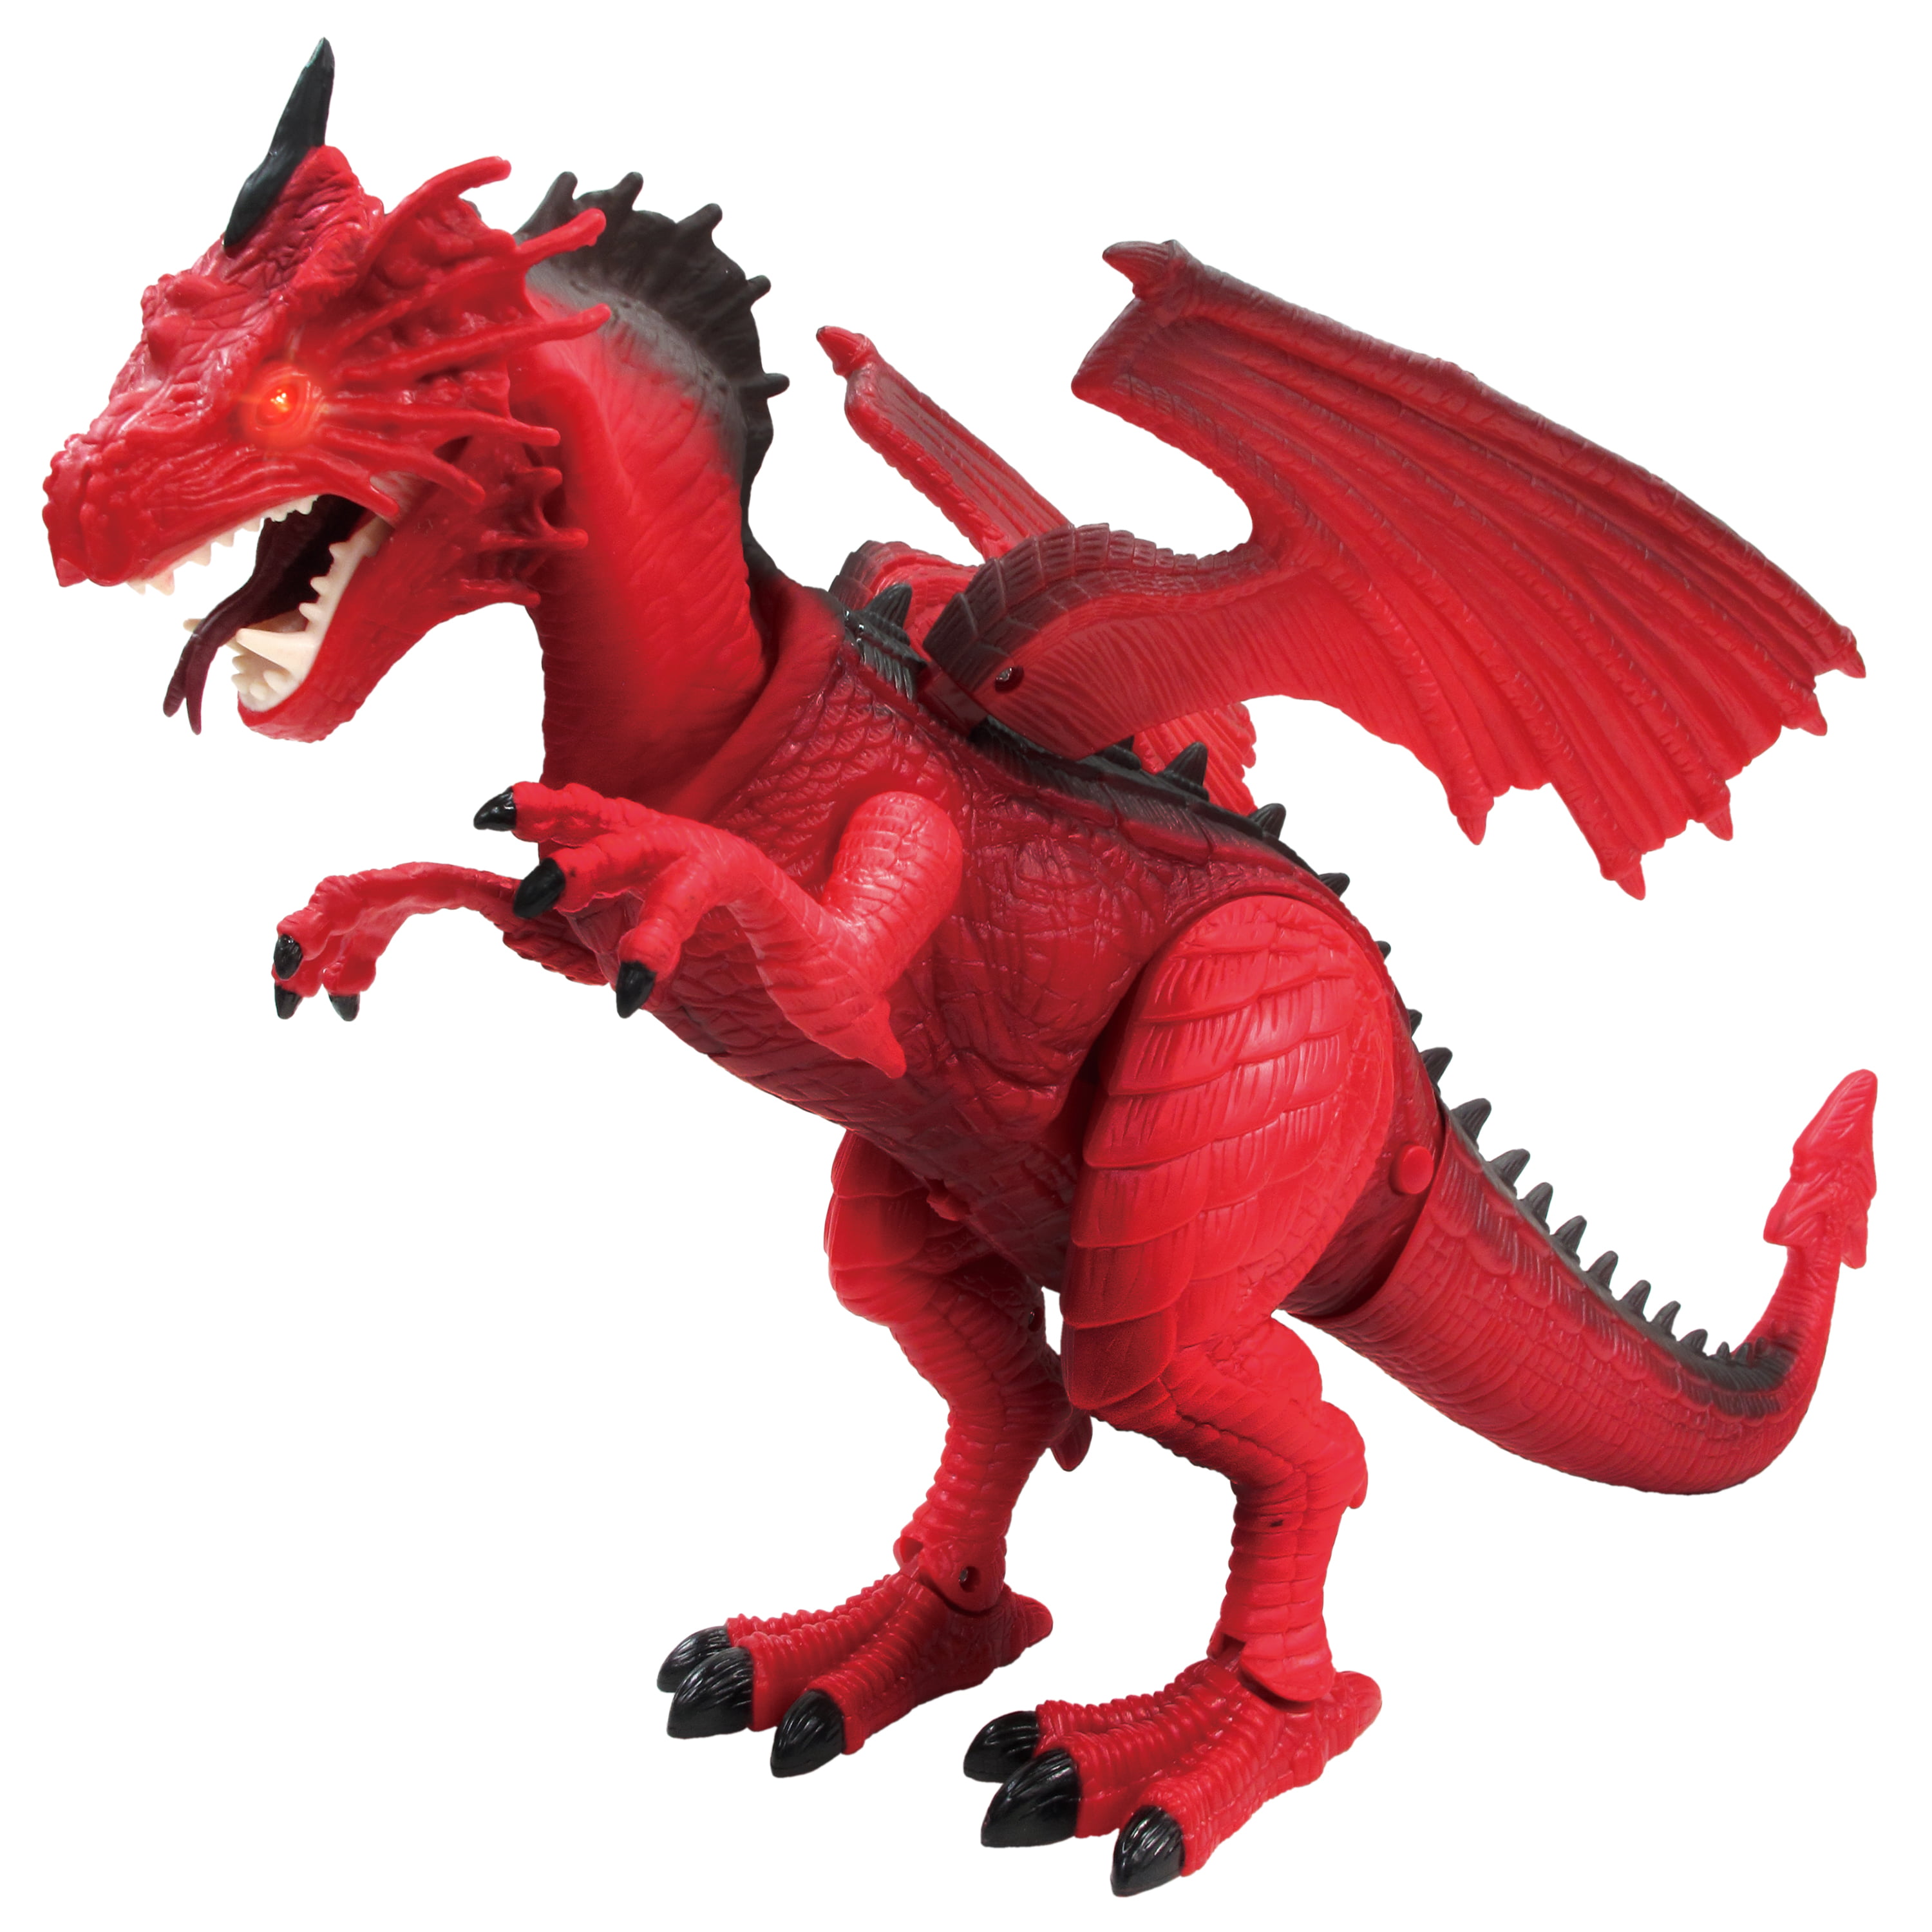 Dragon-I Mighty Megasaur Battery Operated Walking Toy Remote Controlled Vehicles 